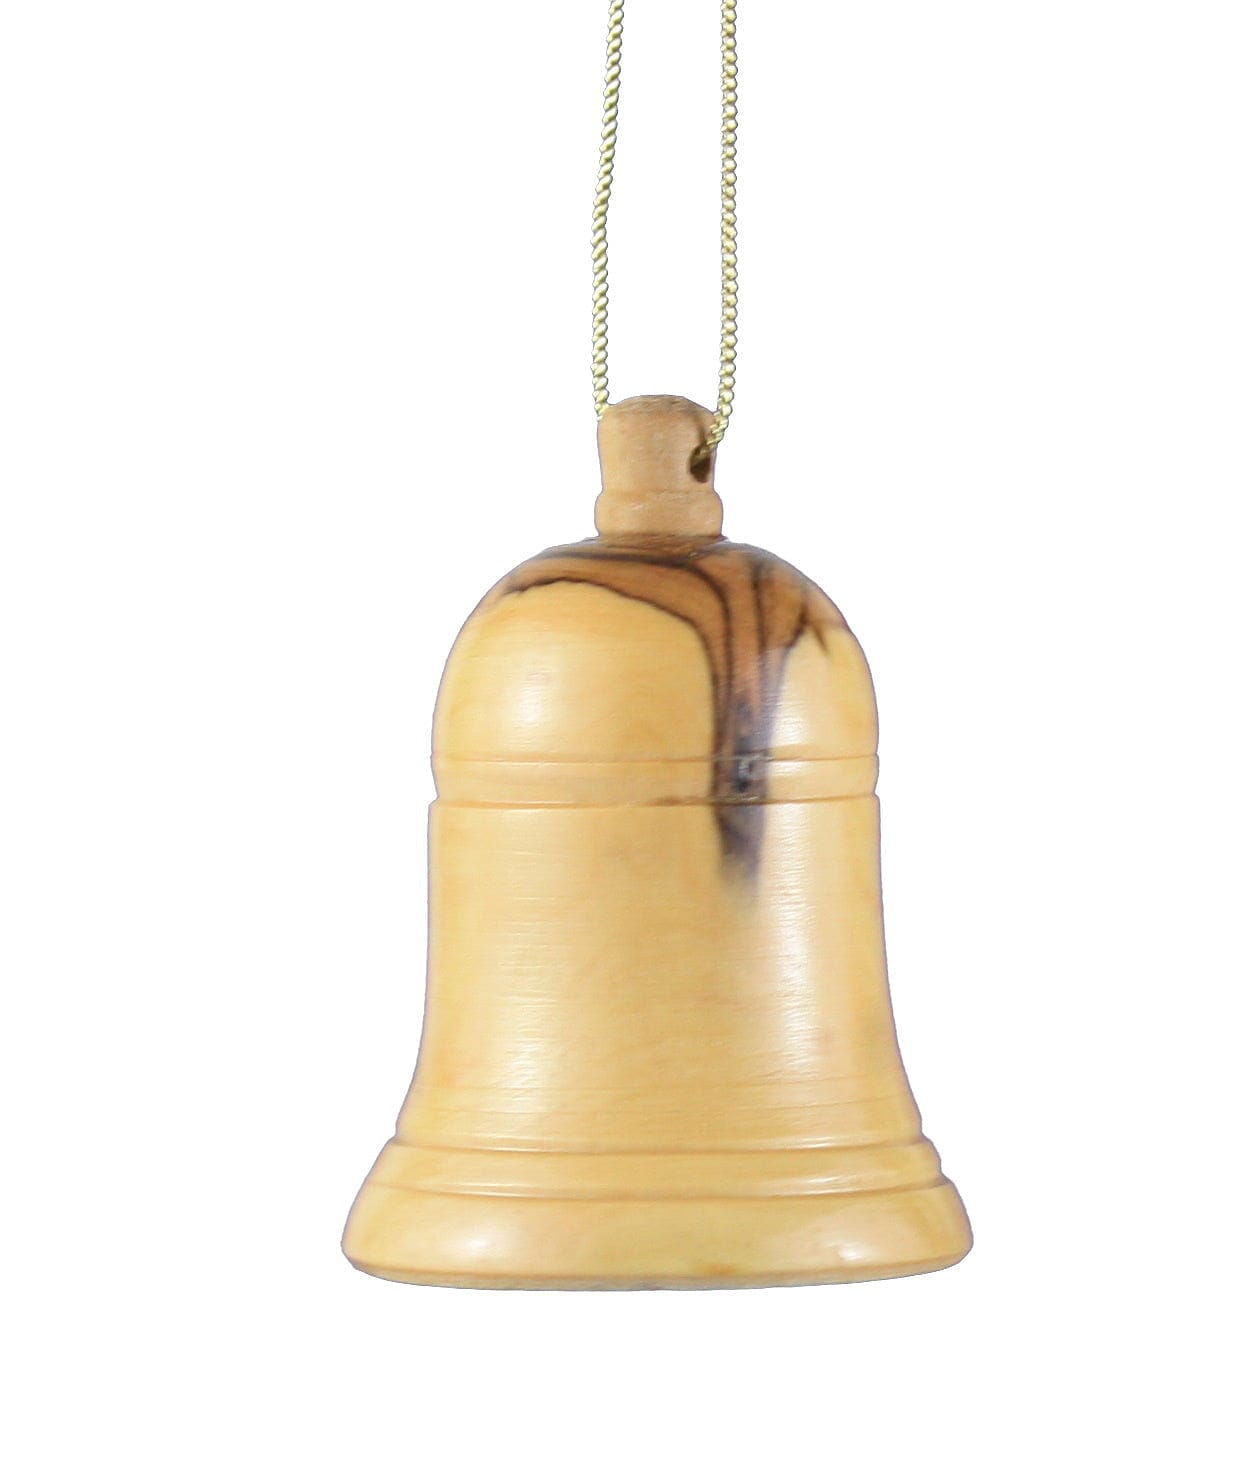 Solid Olive Wood Bell Ornament -  Small (2.25") - Shelburne Country Store